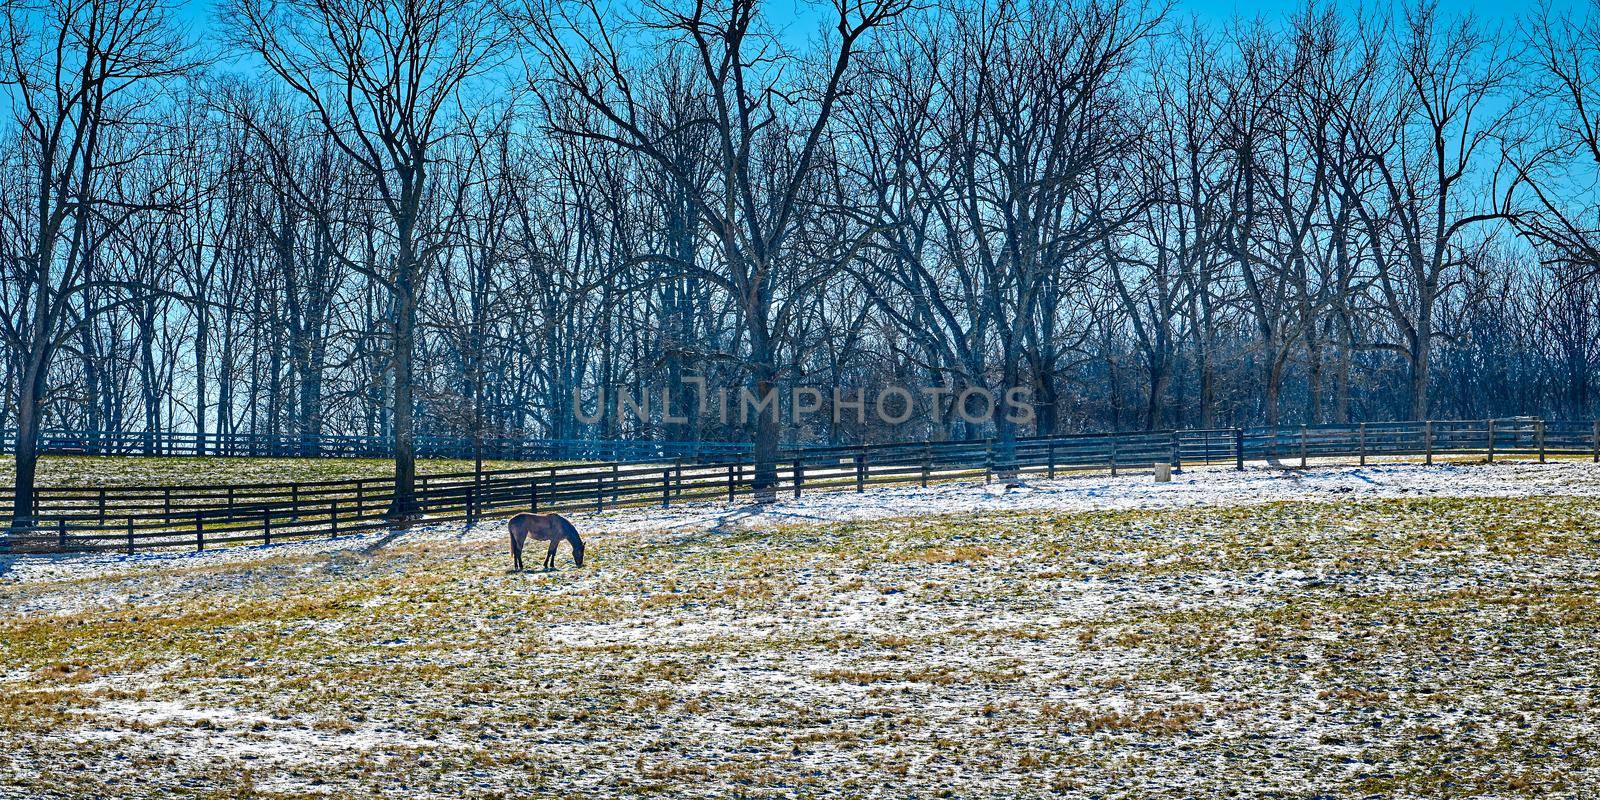 Thoroughbred horse gazing in a snow cover fiield with trees and clear blue sky.